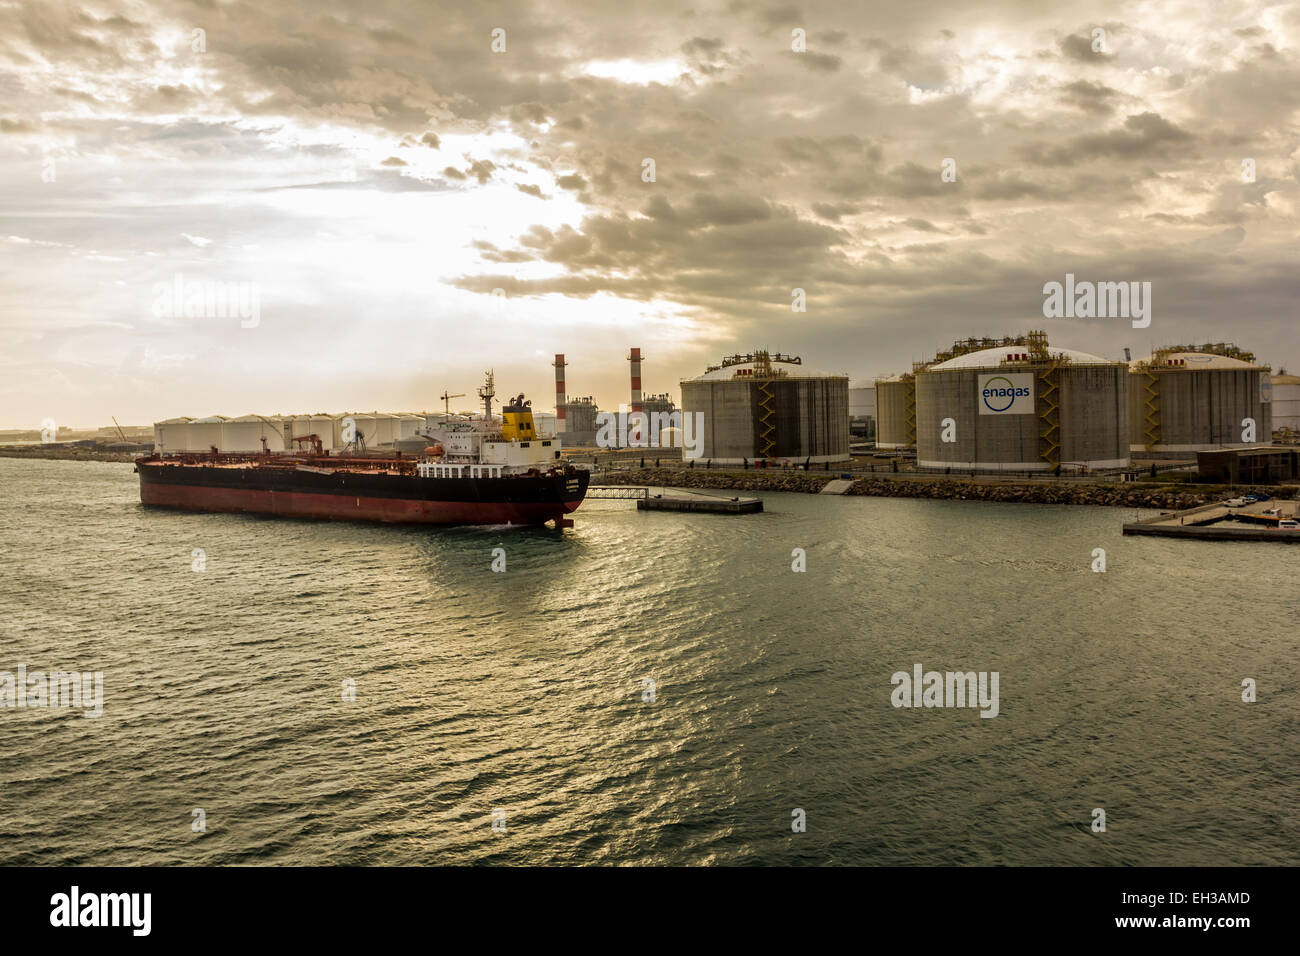 The ship Louise docked at the Enagas  liquefied natural gas, regasification facility at the Port of Barcelona ( Port de Barcelon Stock Photo